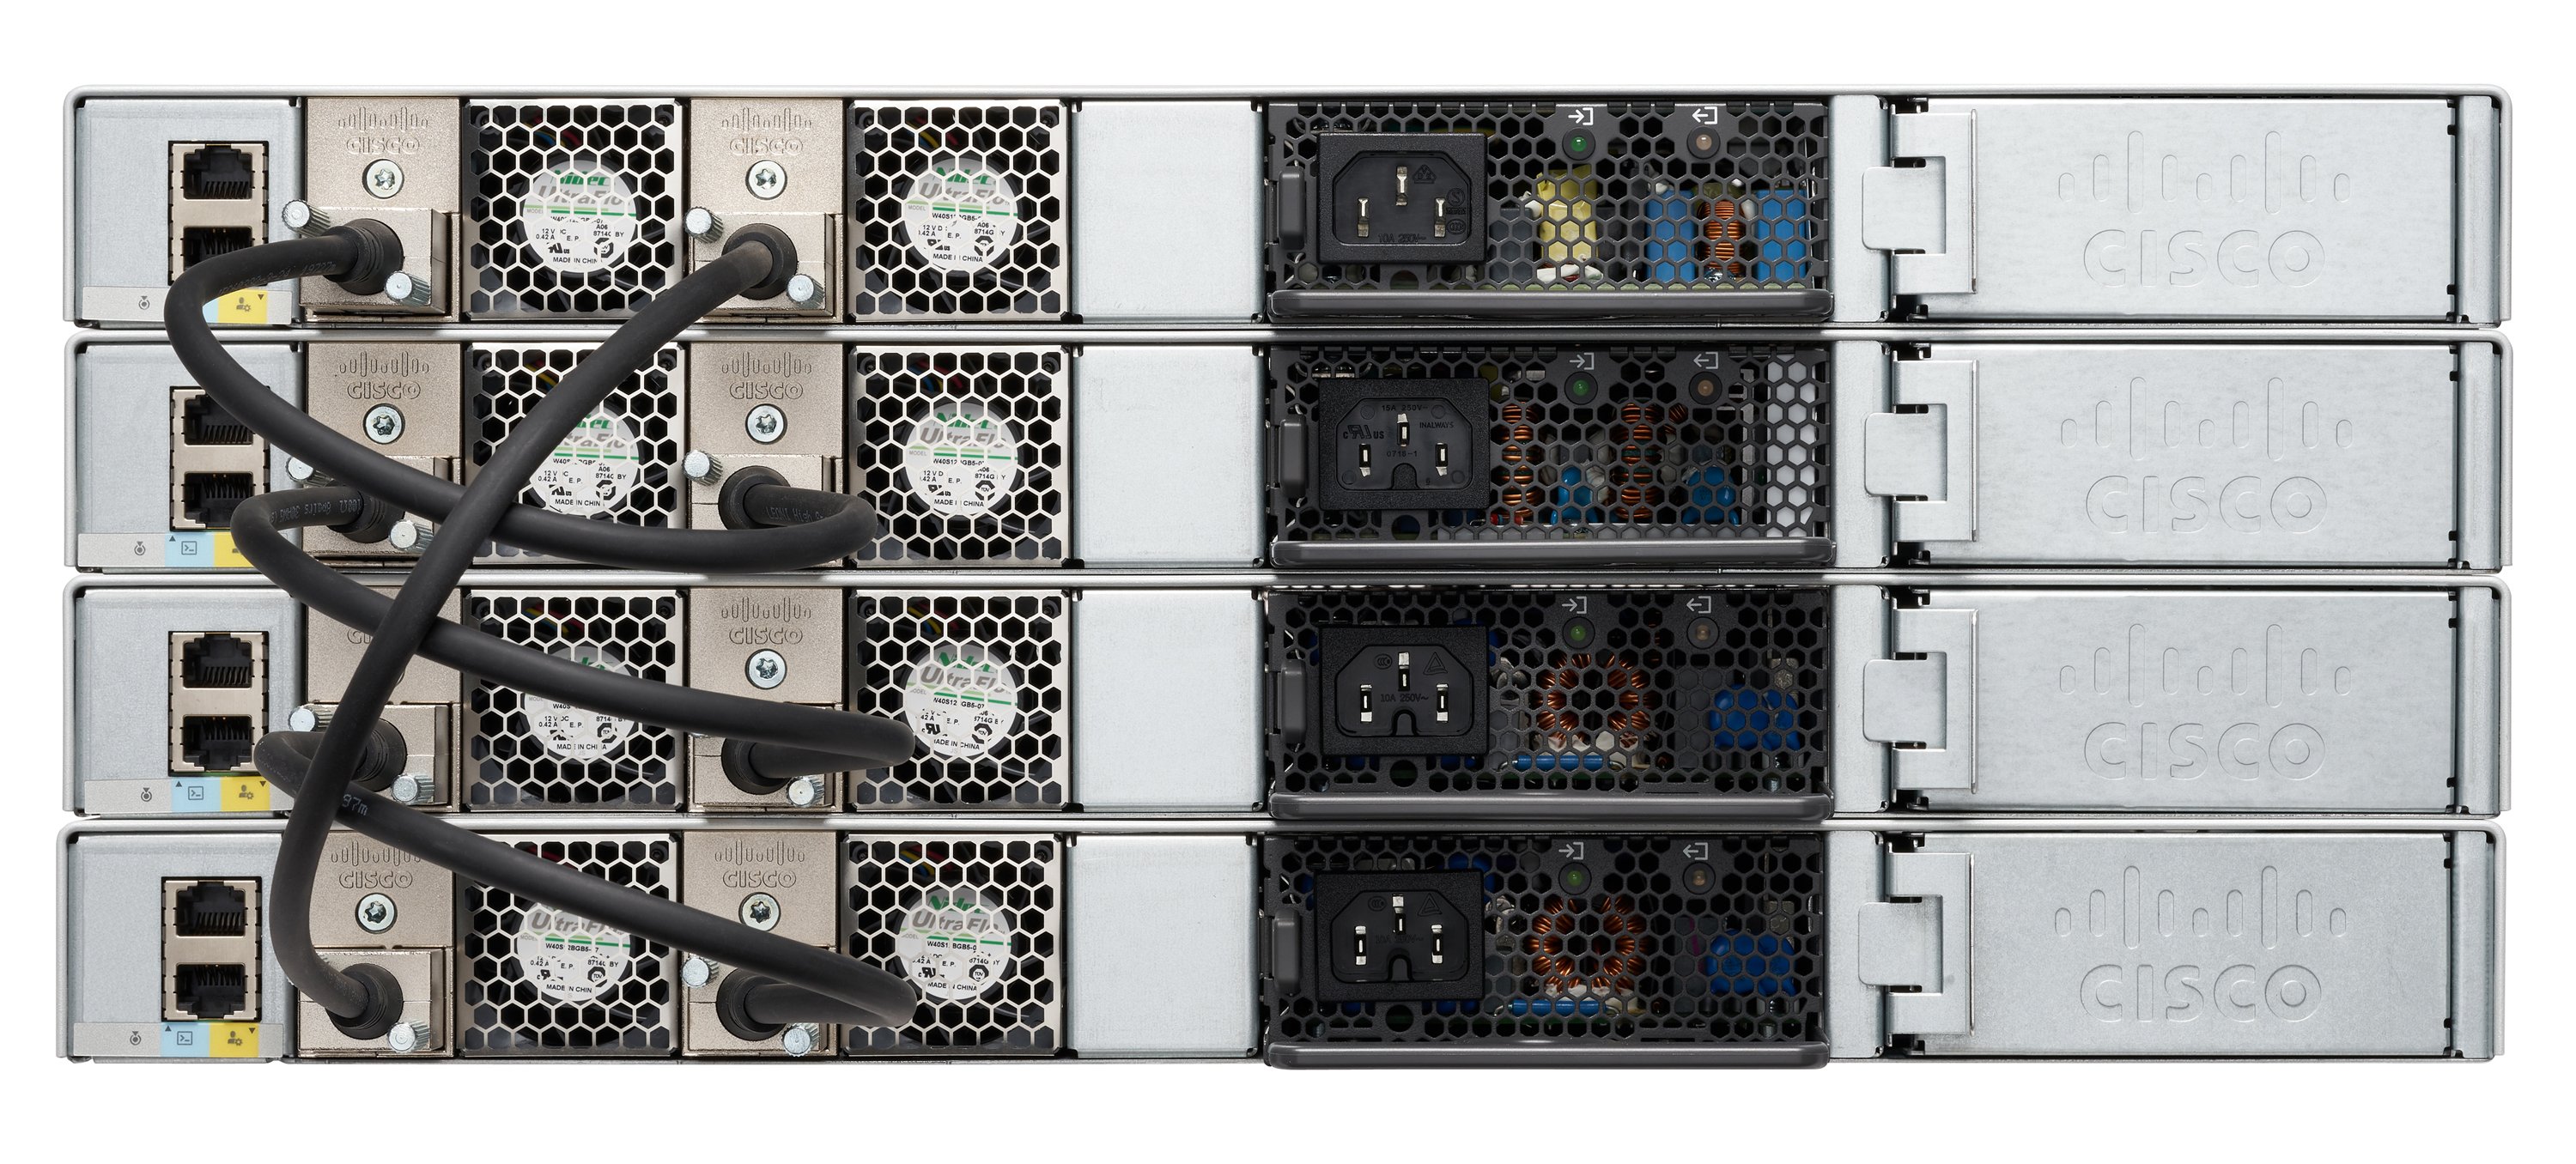 Product image of Cisco Catalyst 9200 Series Switches